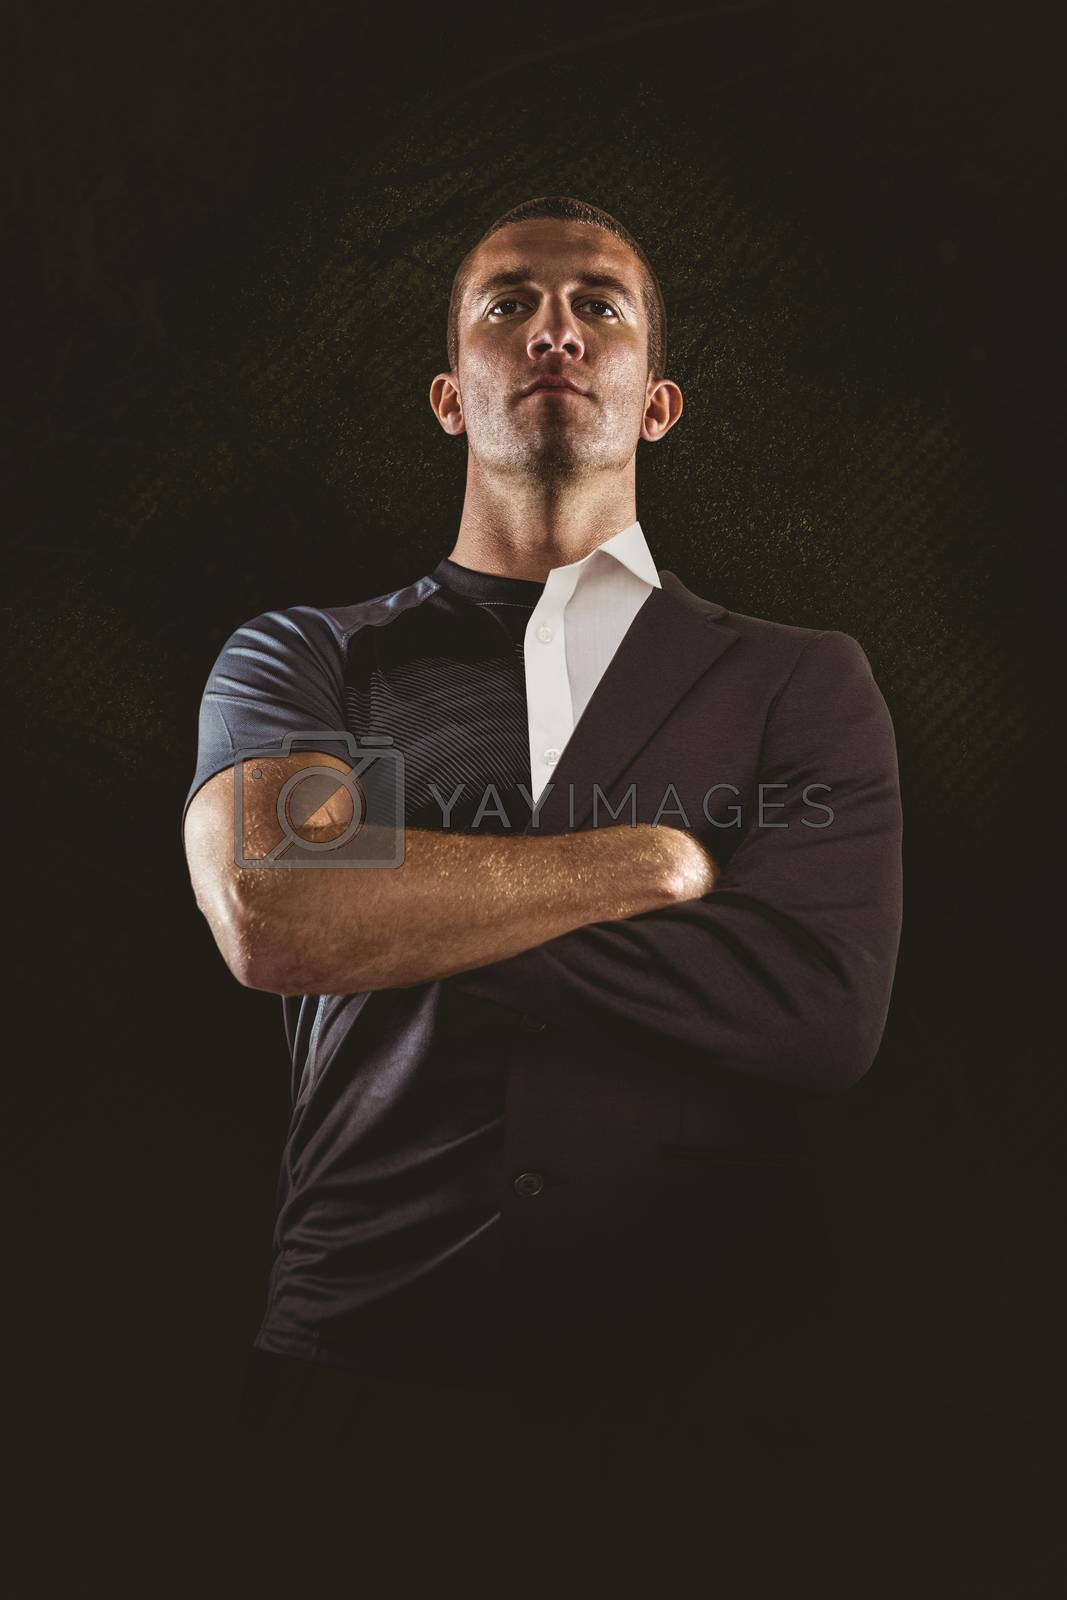 Royalty free image of Composite image of confident rugby player with arms crossed by Wavebreakmedia